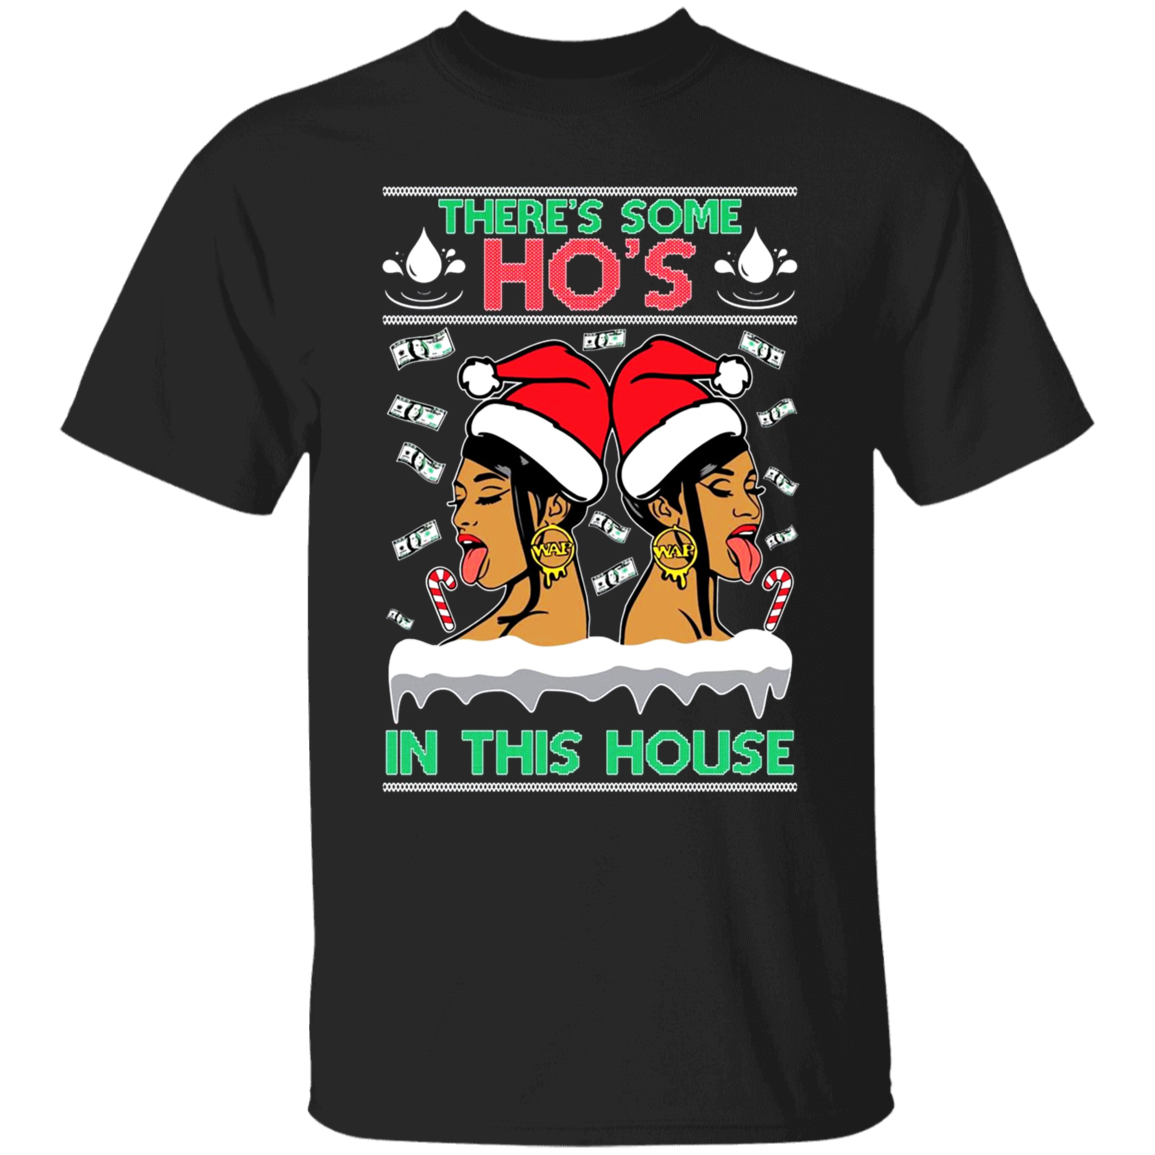 Hos in This House Apparel